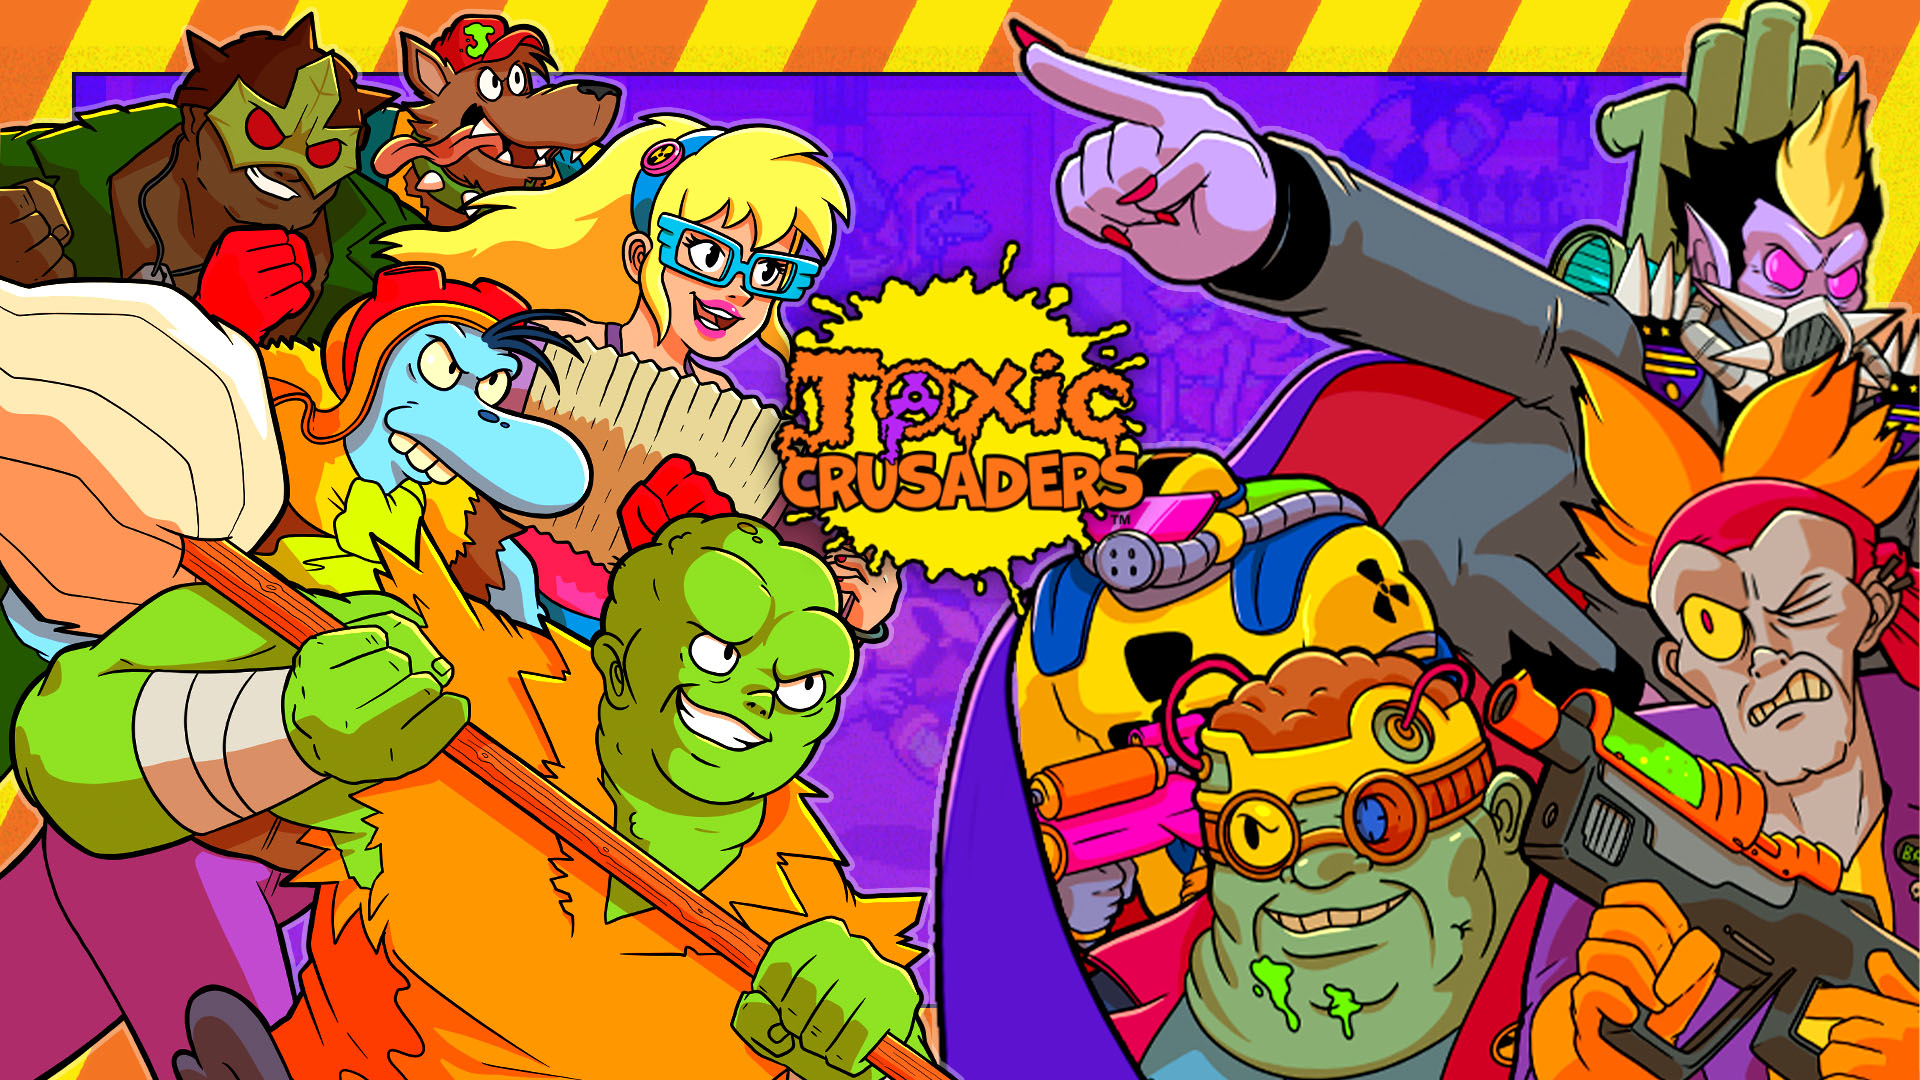 Toxic Crusaders announced, new beat ’em up game from The Toxic Avenger